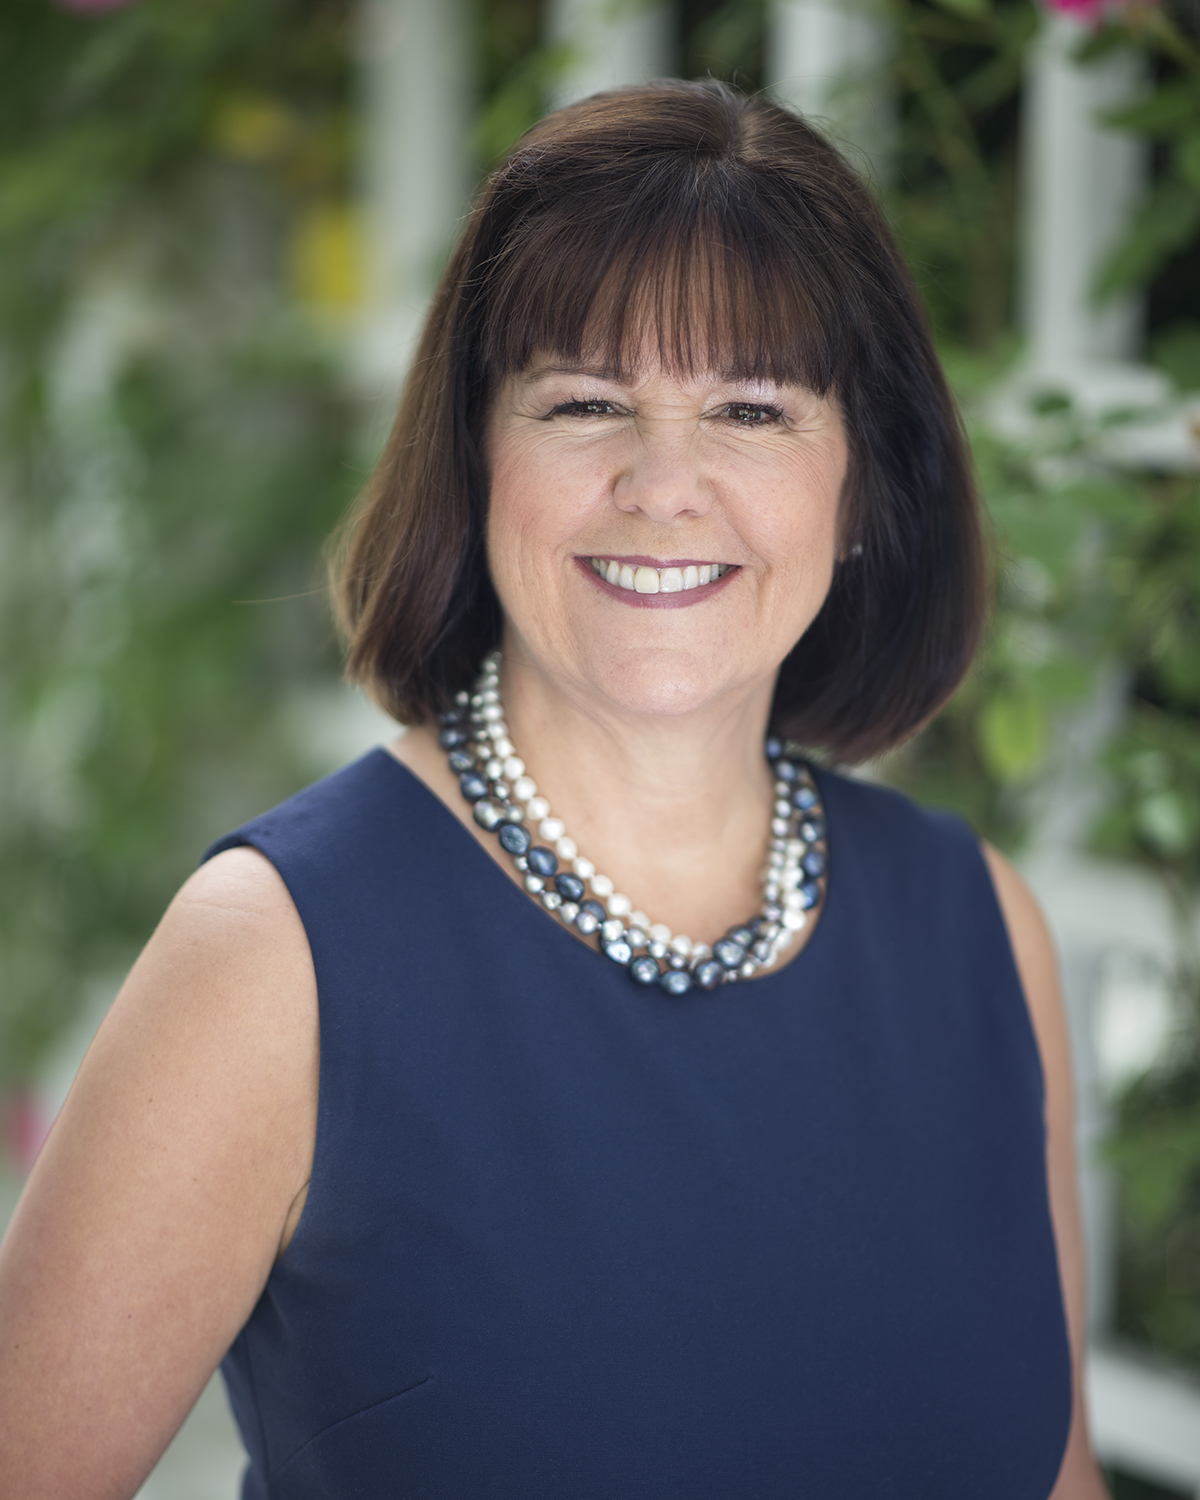 Official Portrait of the Second Lady of the United States, Mrs. Karen Pence. (Official White House Photo by Allaina Parton)